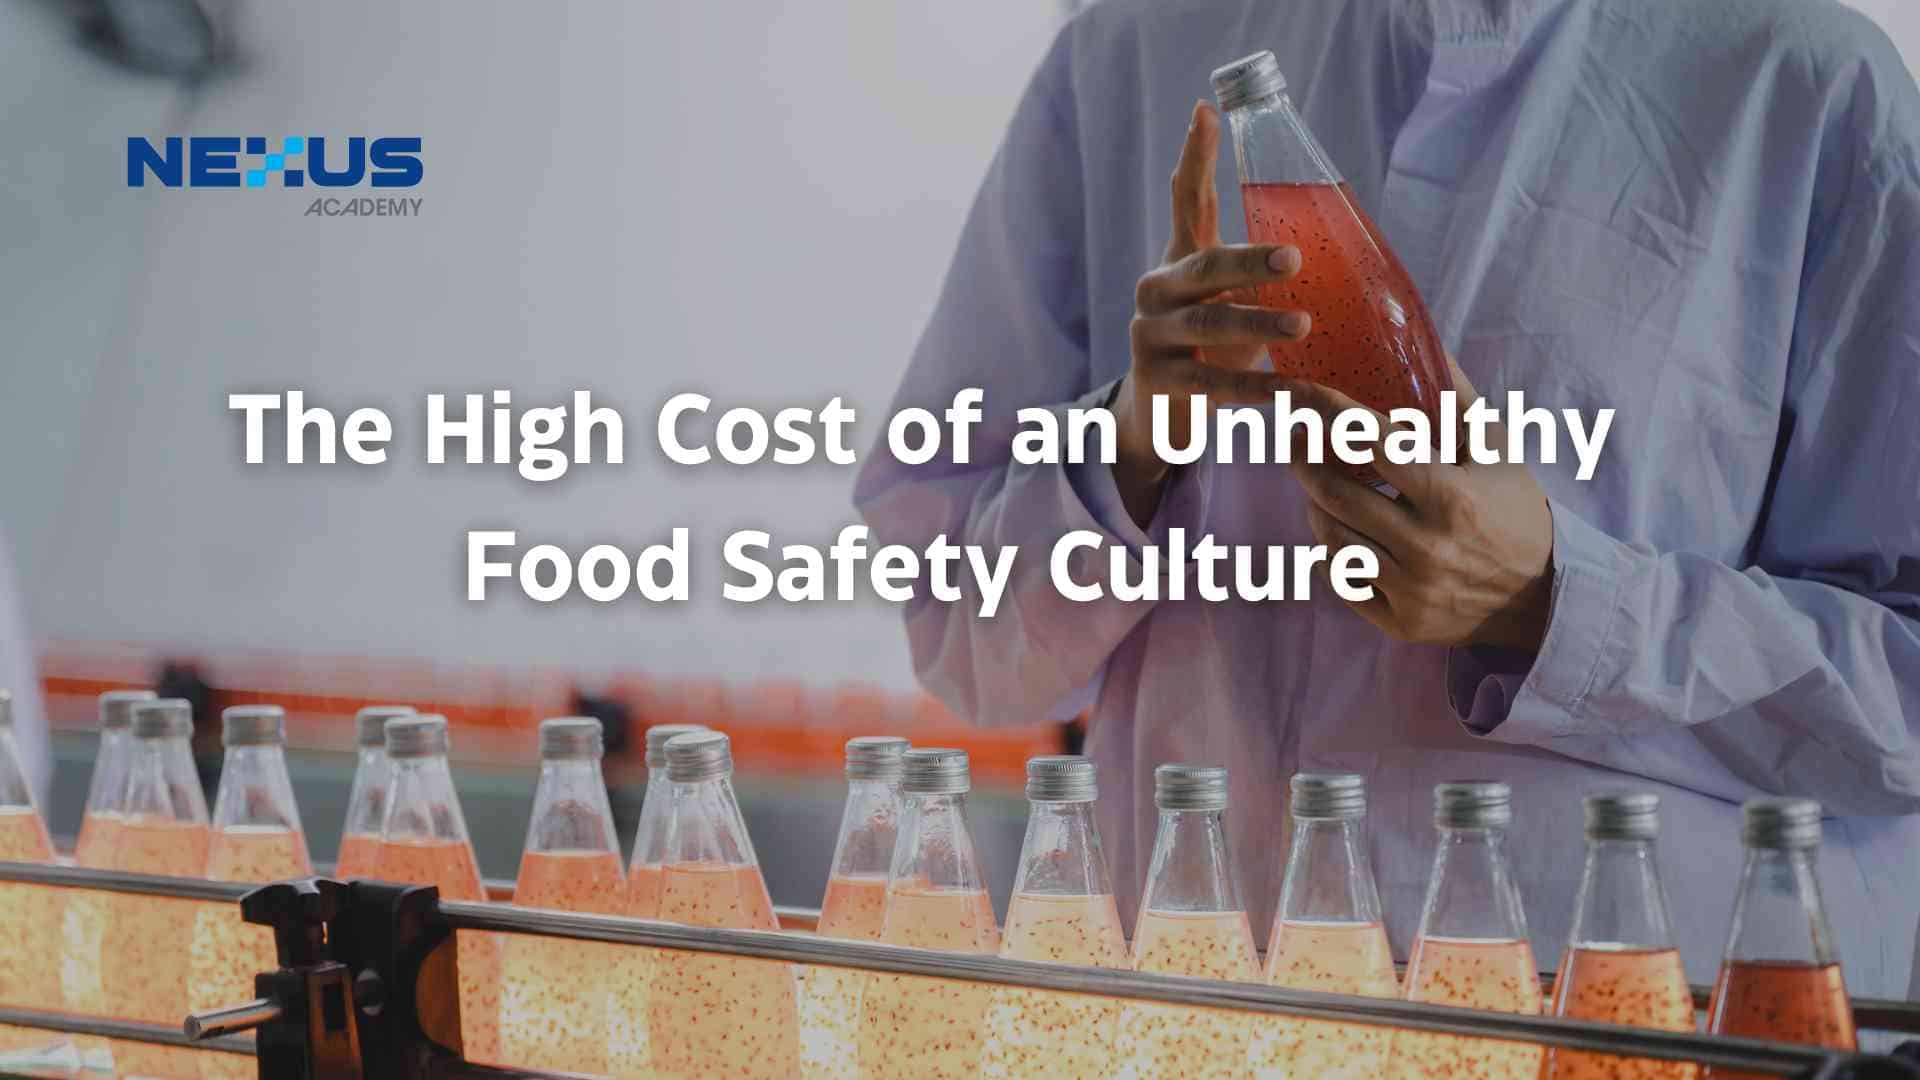 The High Cost of an Unhealthy Food Safety Culture